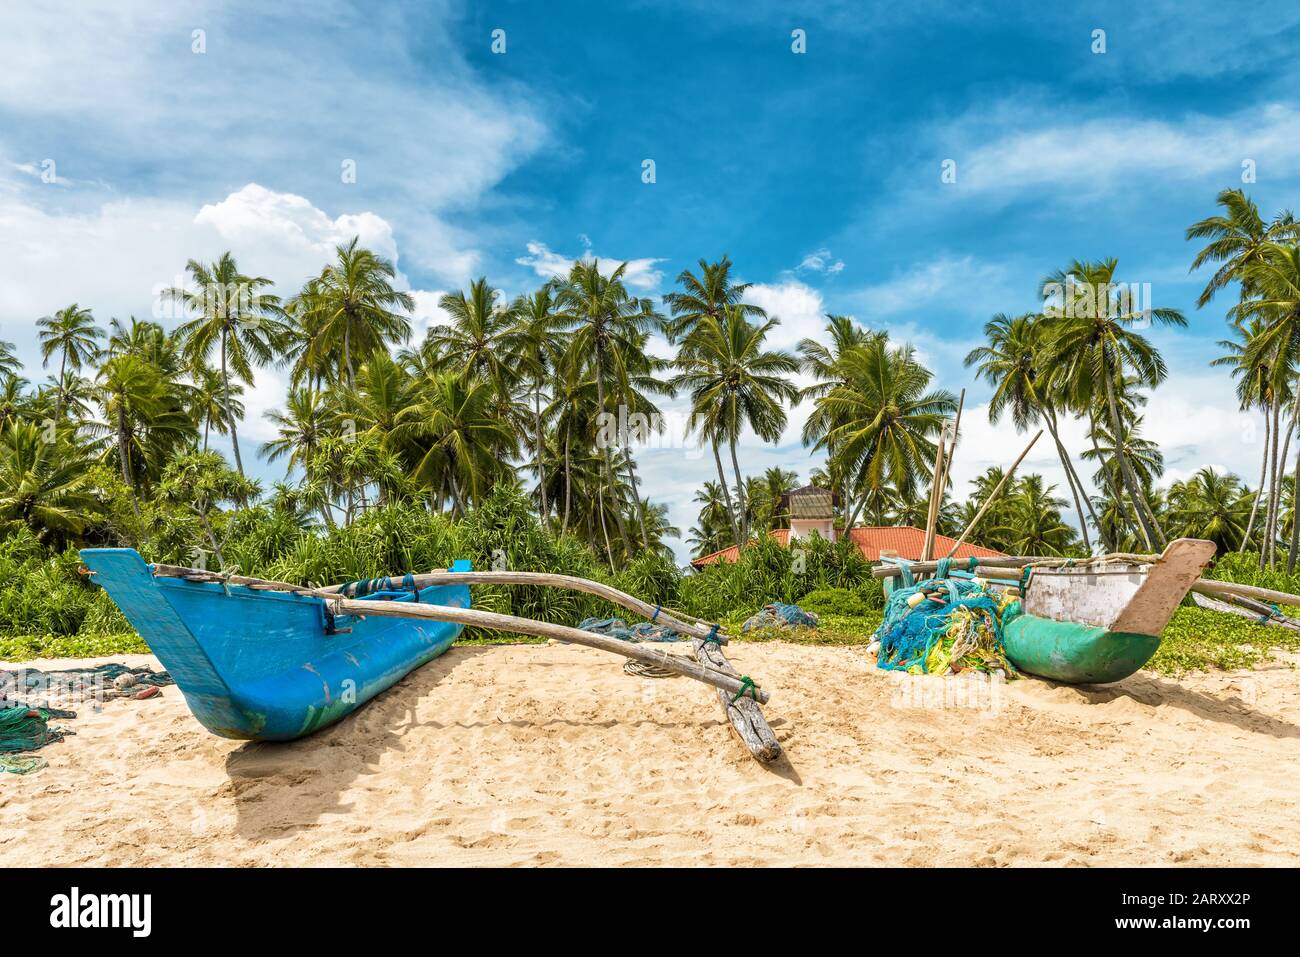 Old traditional fishing boats on the beach in Sri Lanka. View of the tropical beach with coconut palms. Stock Photo